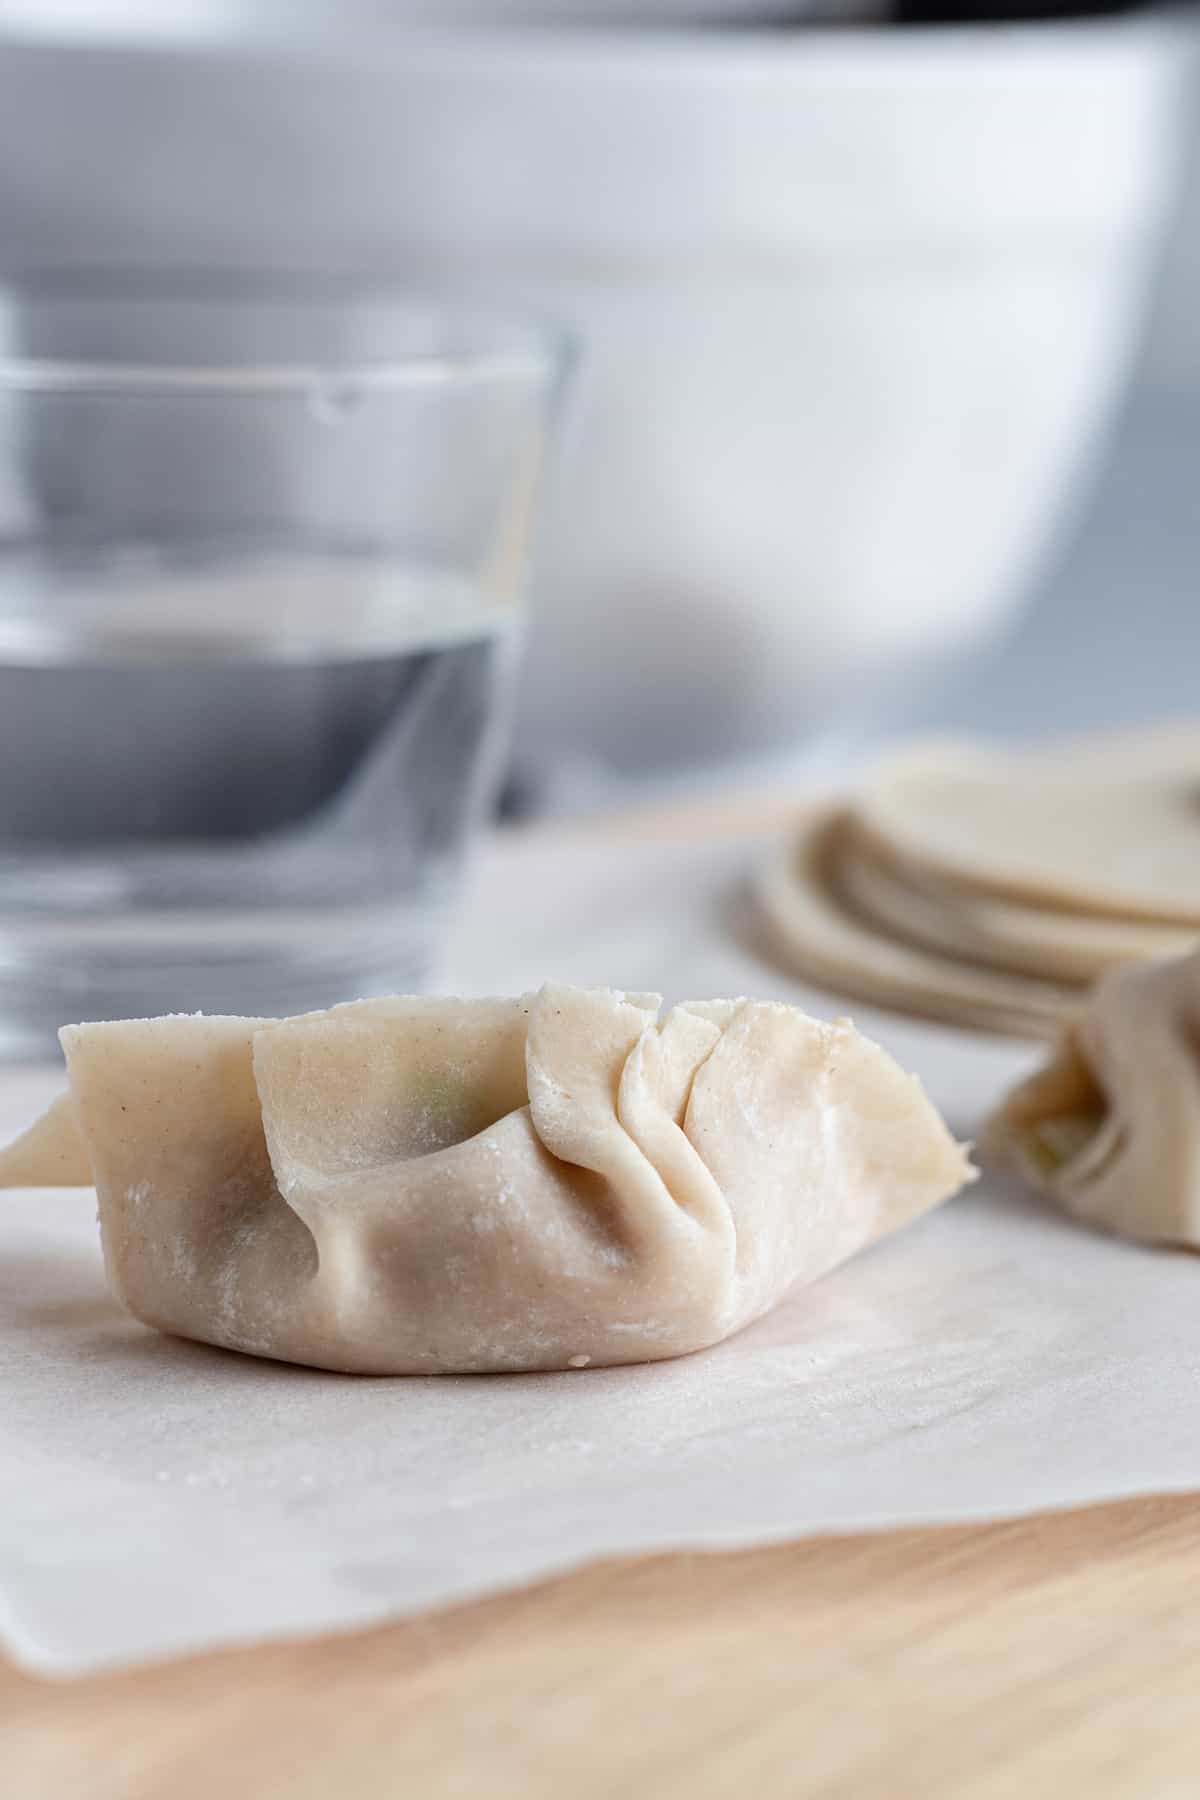 A Filled and Sealed Dumpling Beside a Cup of Water